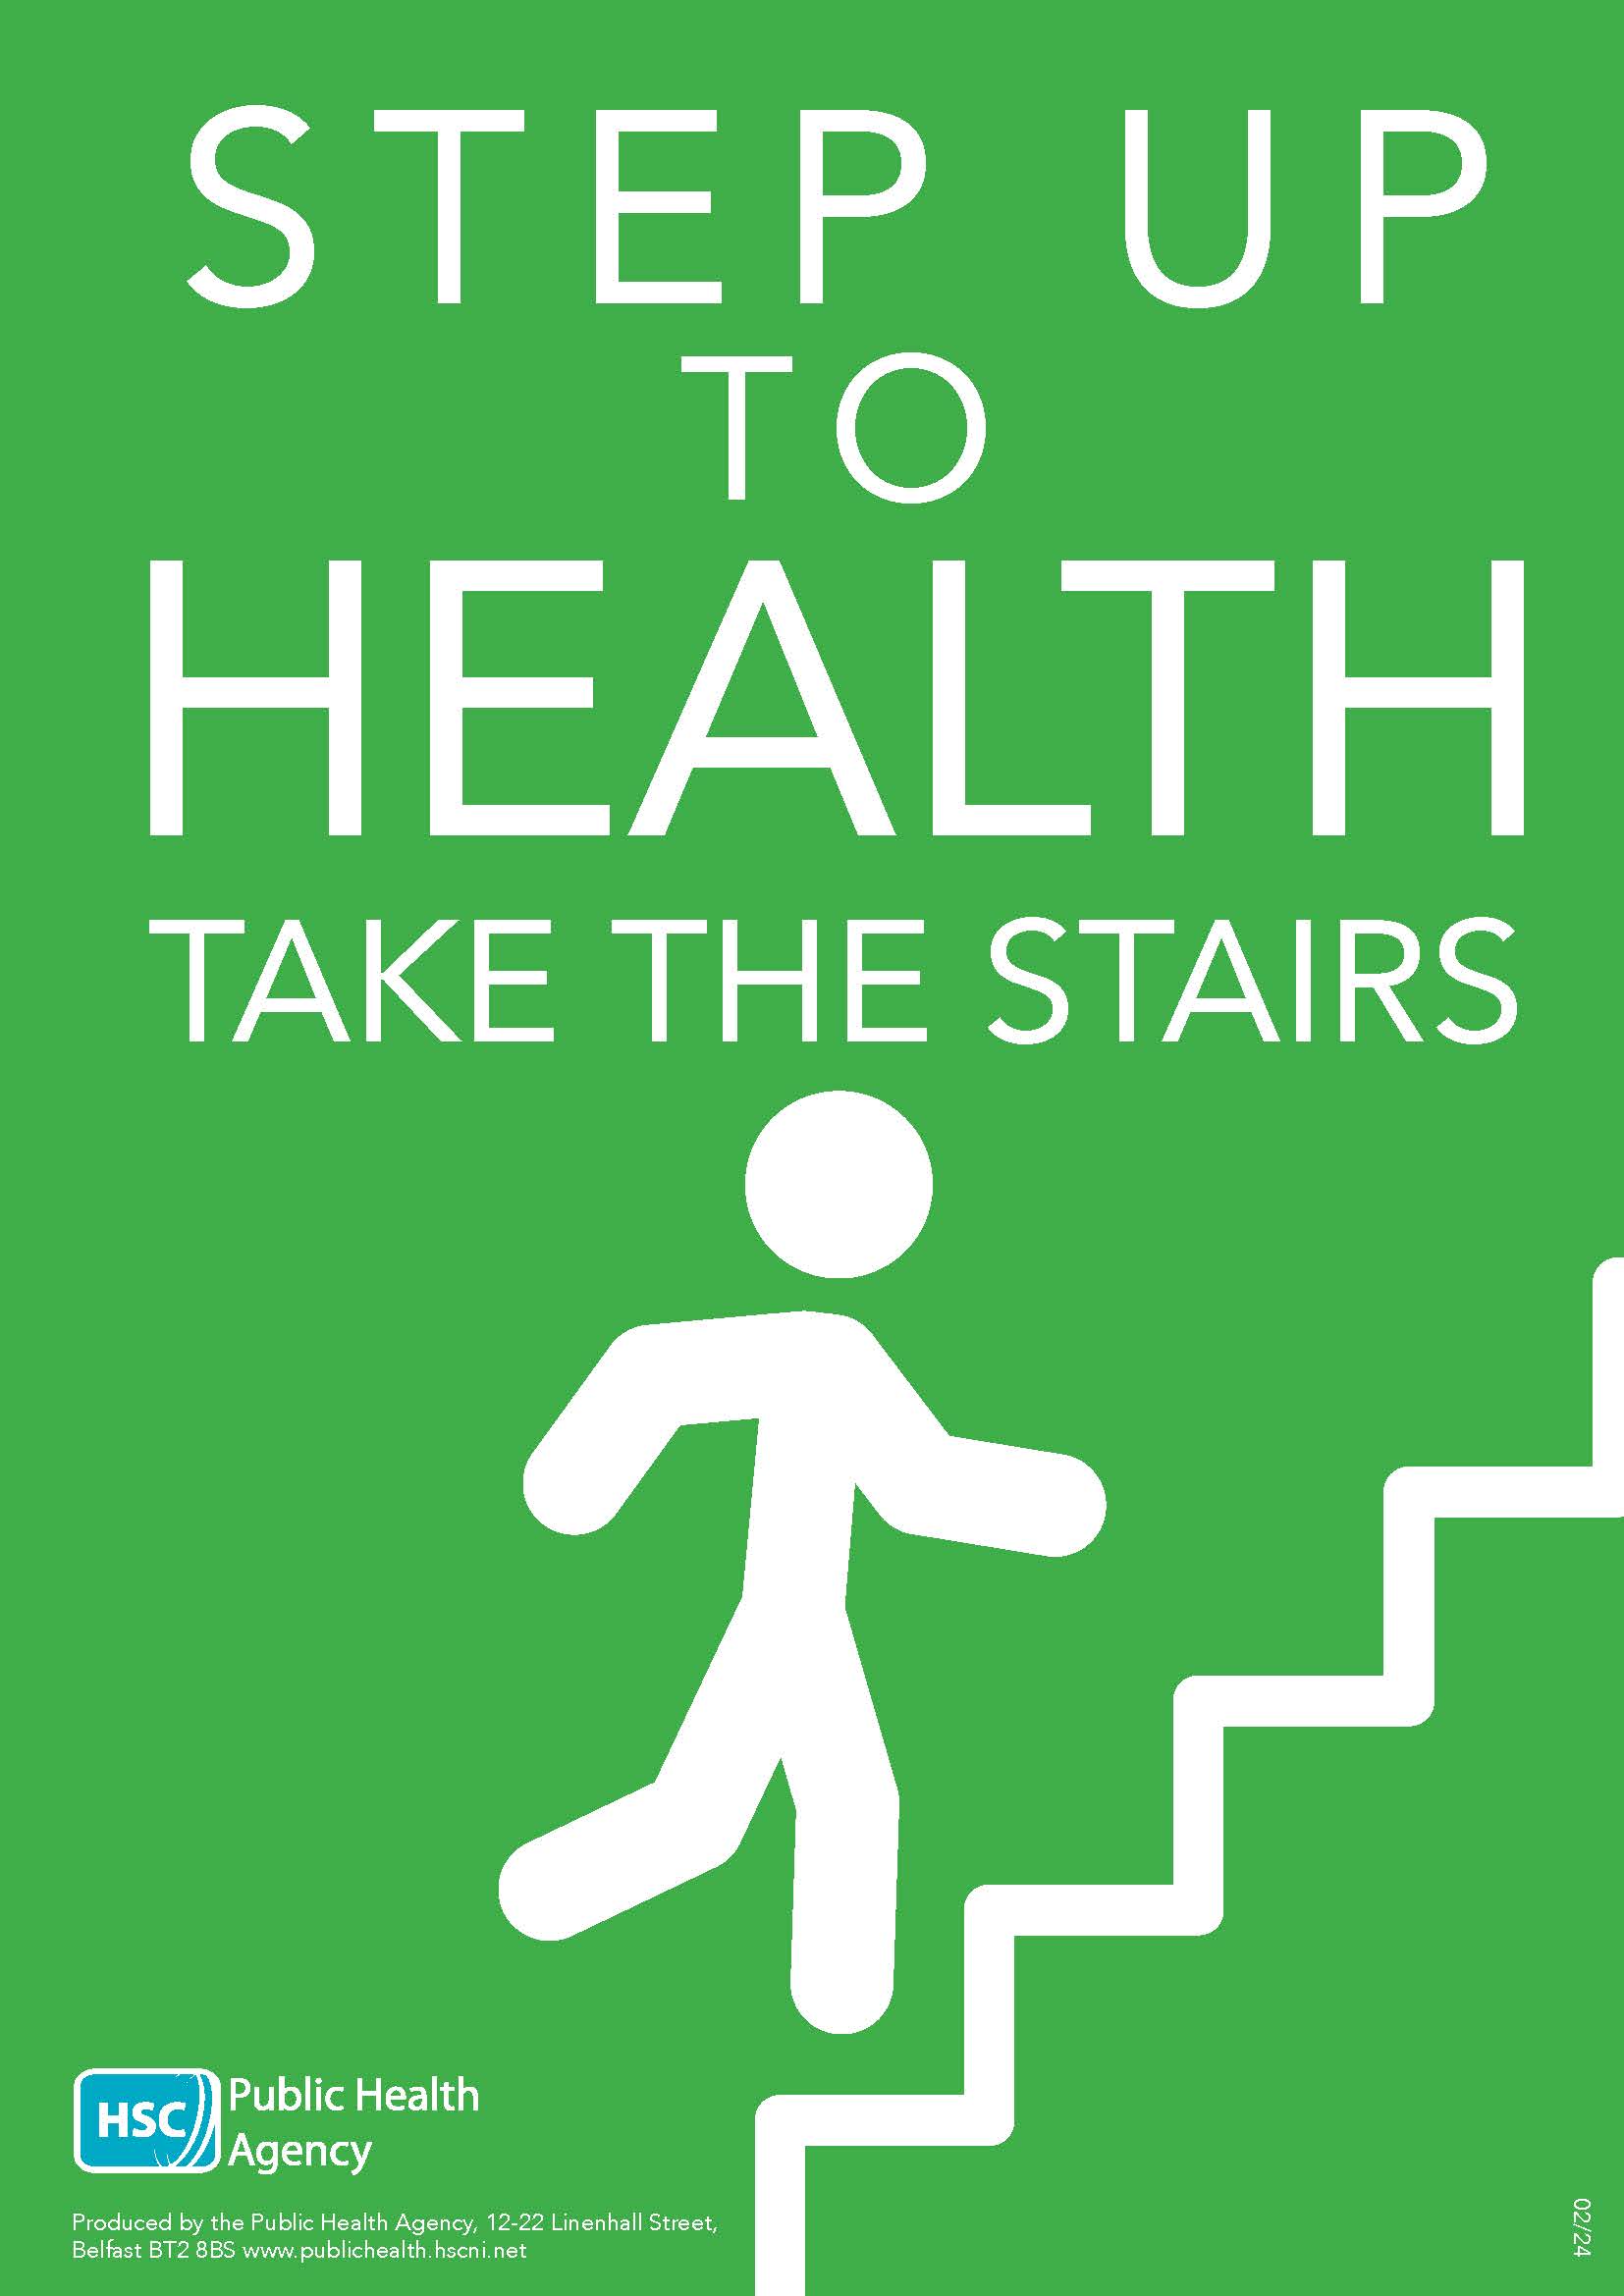 Poster showing person going up stairs